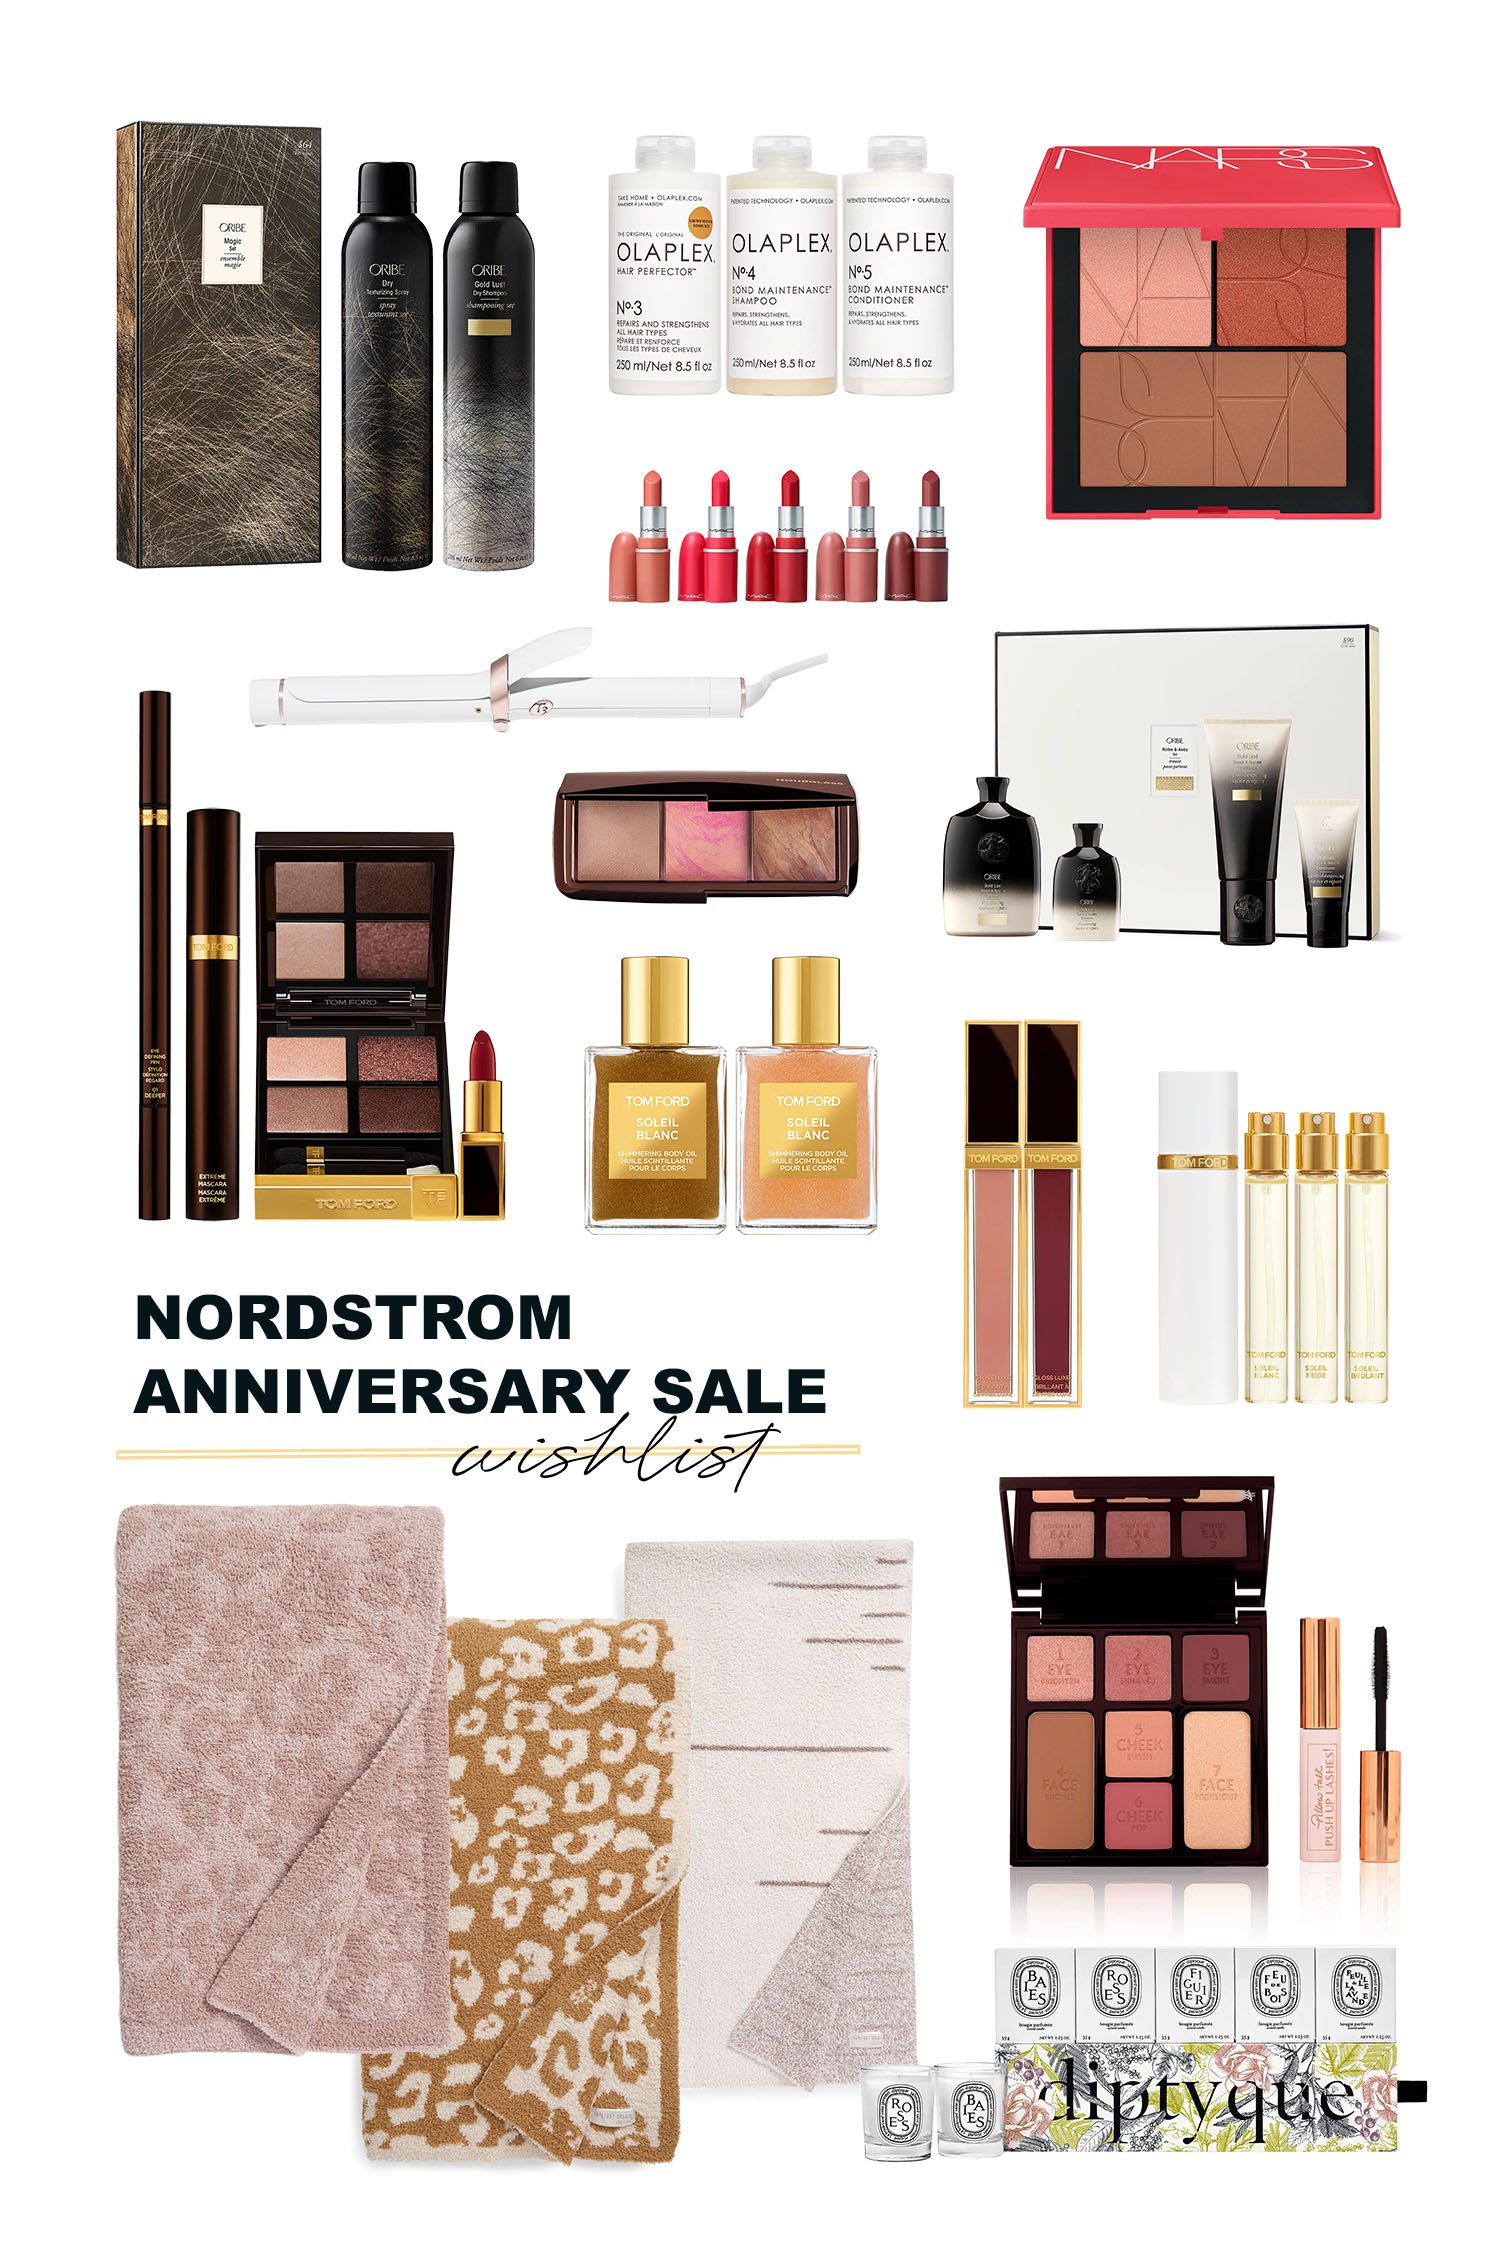 My Favorites From The Nordstrom Anniversary Sale - The Middle Page